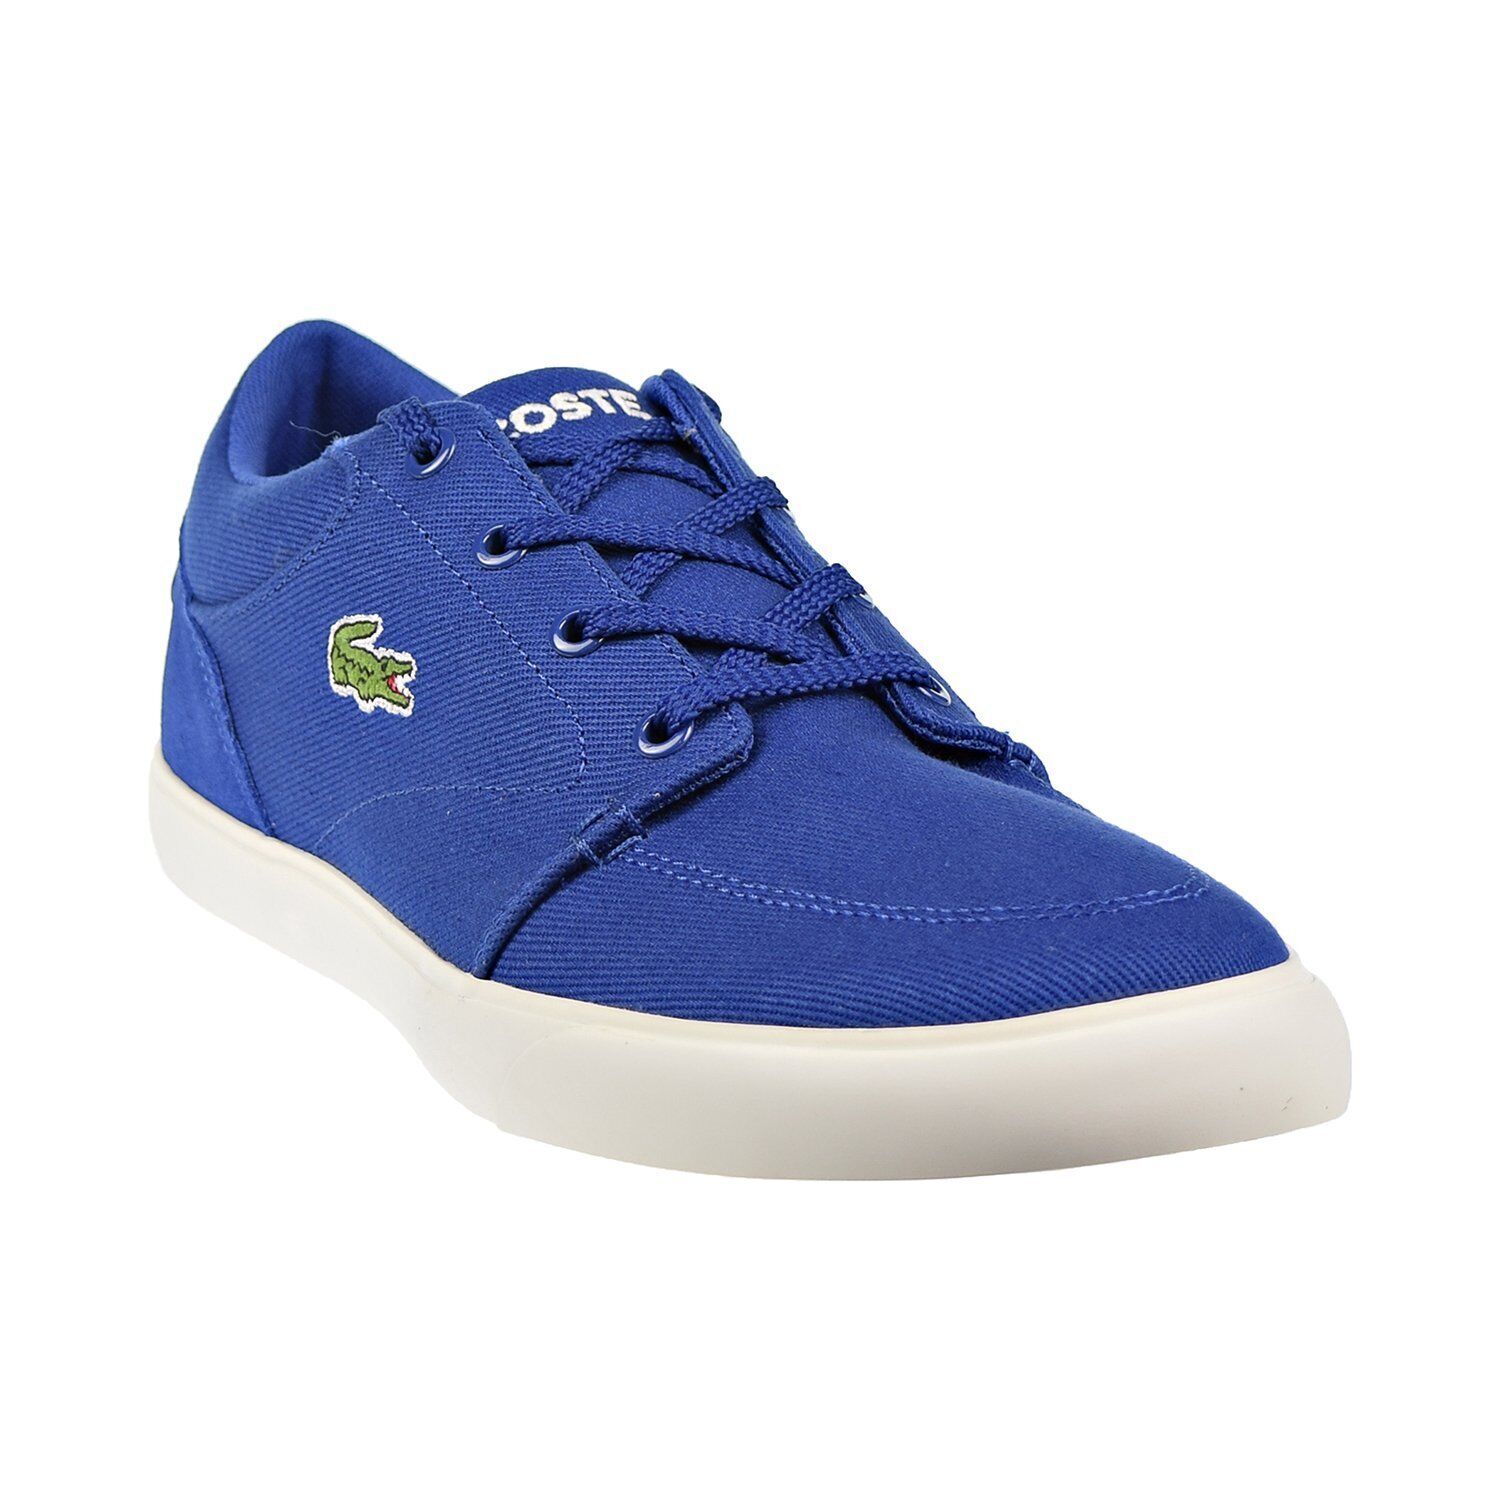 Lacoste Men Casual Fashion Sneakers Bayliss 219 Size US 12 Dark Blue Canvas - £51.20 GBP